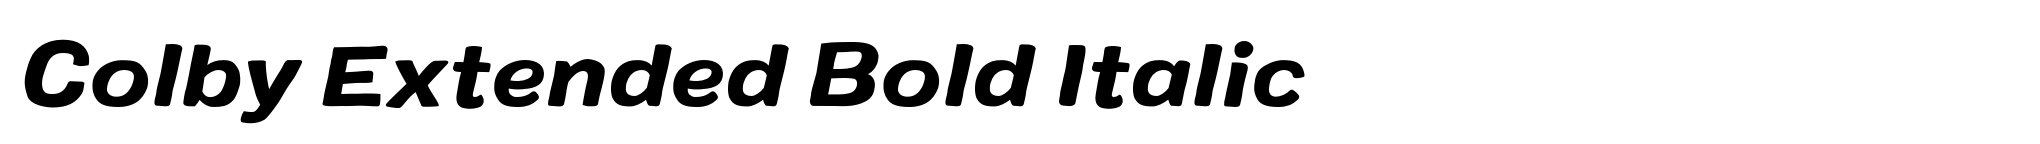 Colby Extended Bold Italic image